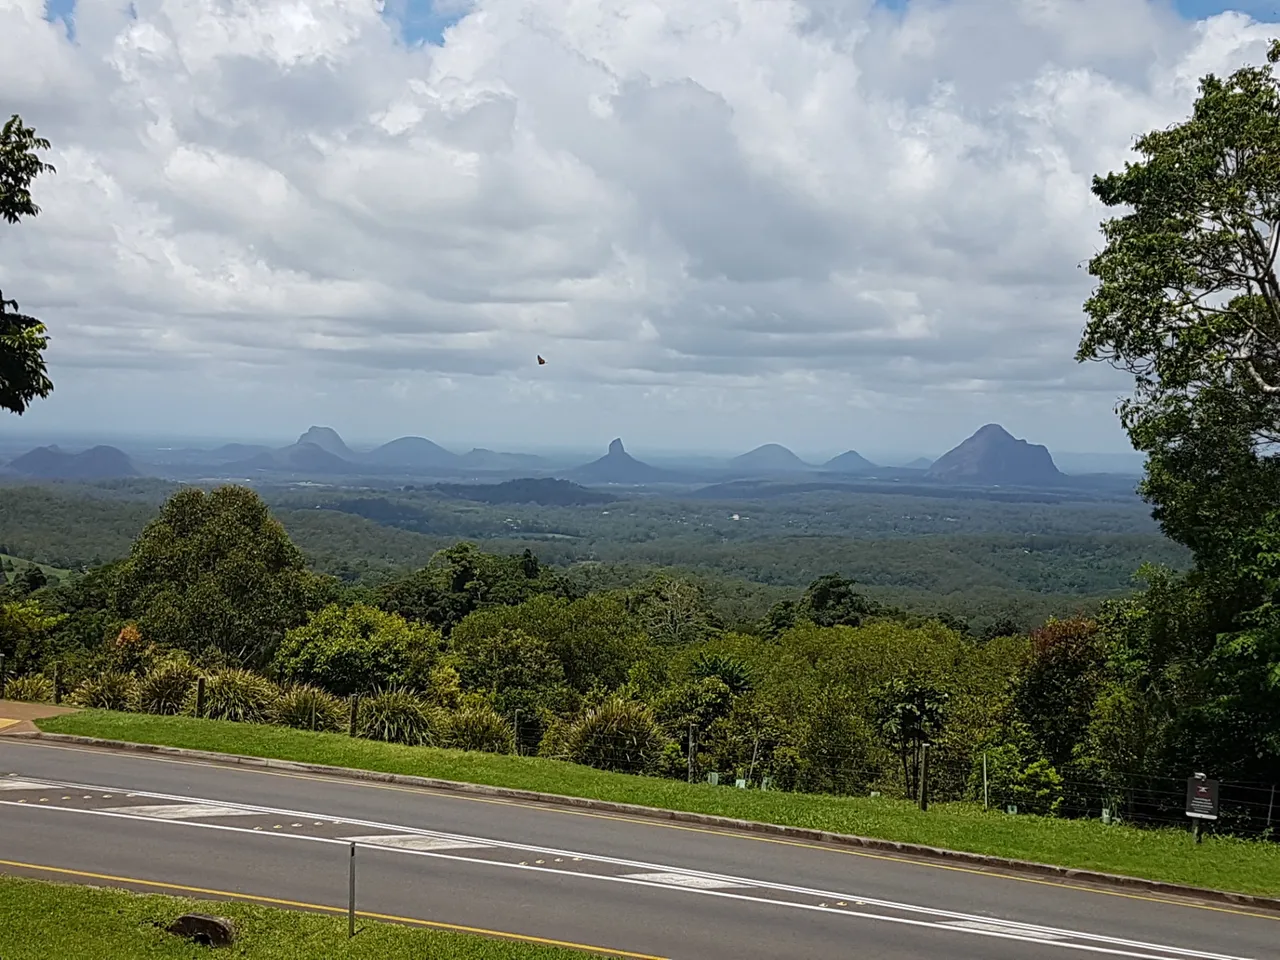 View of the Glasshouse Mountains from Mary Caincross Park. Mt Beerwah is the biggest one on the far right.